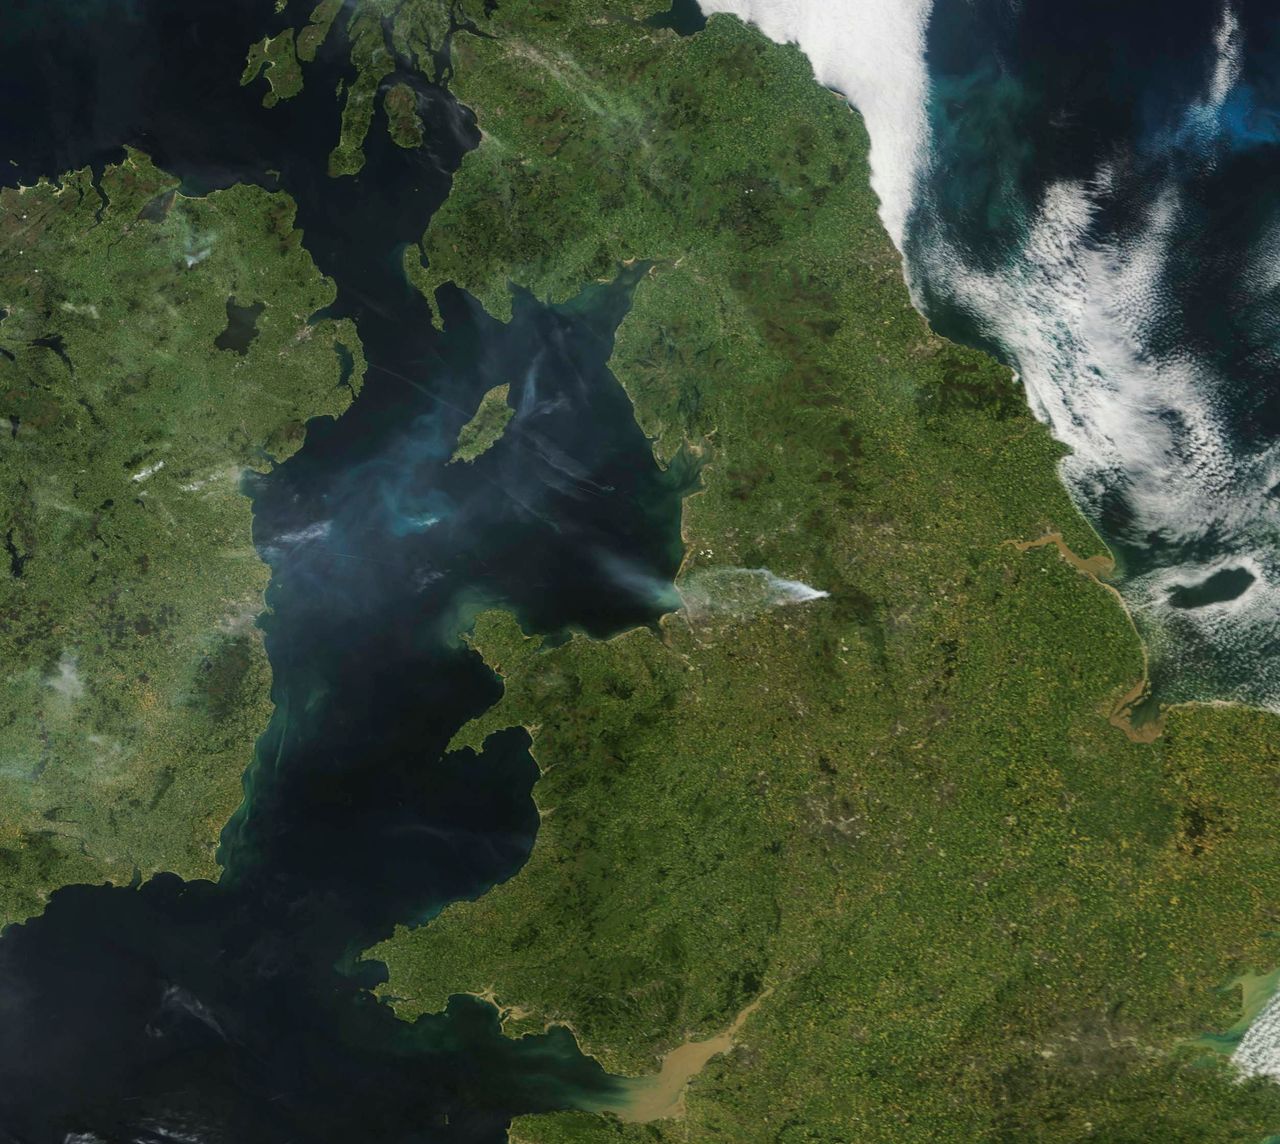 The University of Dundee's satellite observatory depicts large plumes of smoke from the Saddleworth wildfire.